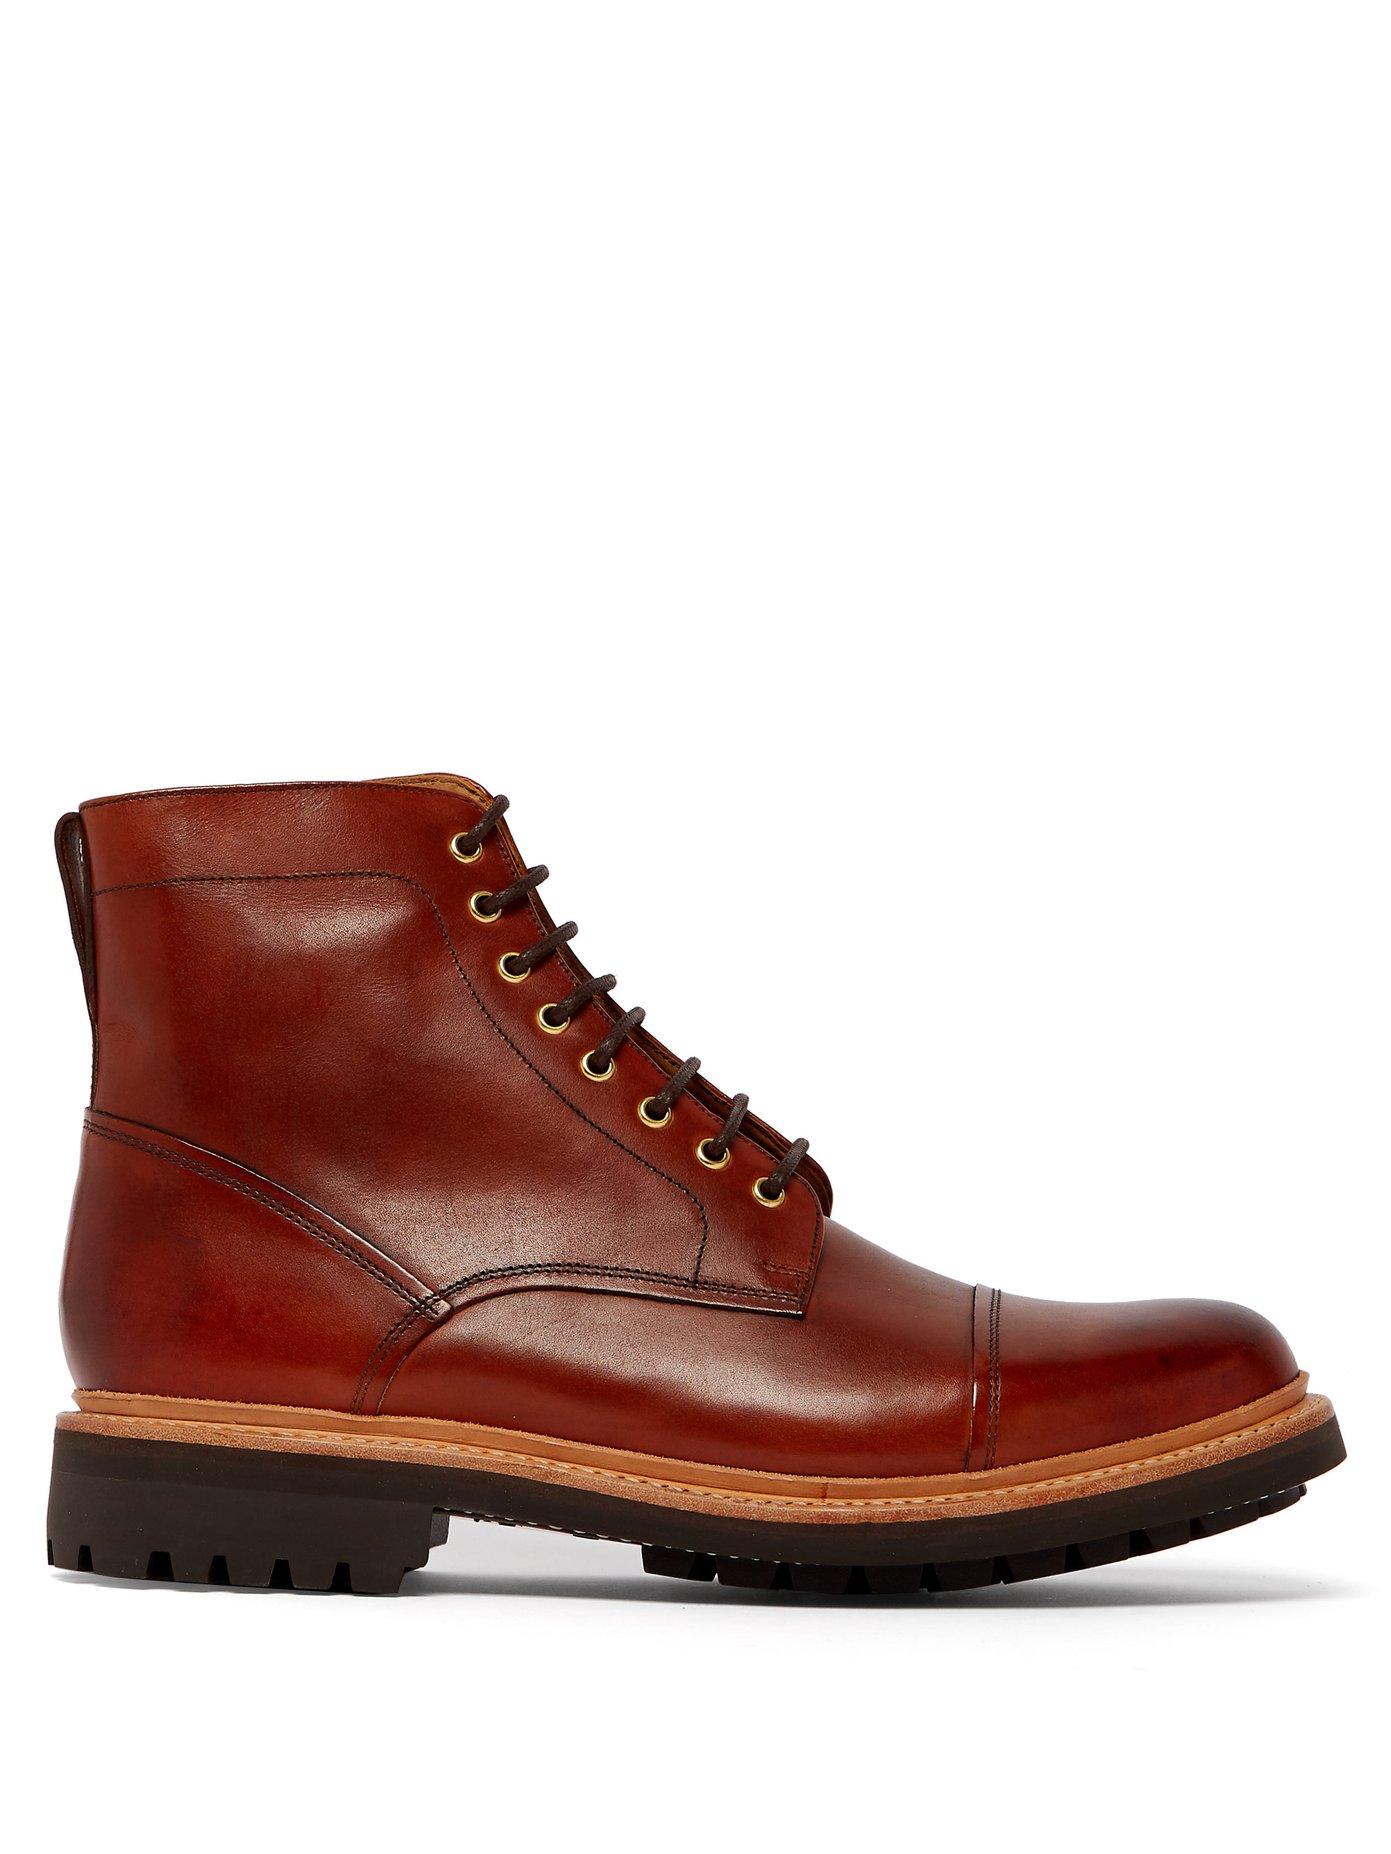 Joseph lace-up leather boots | Grenson 